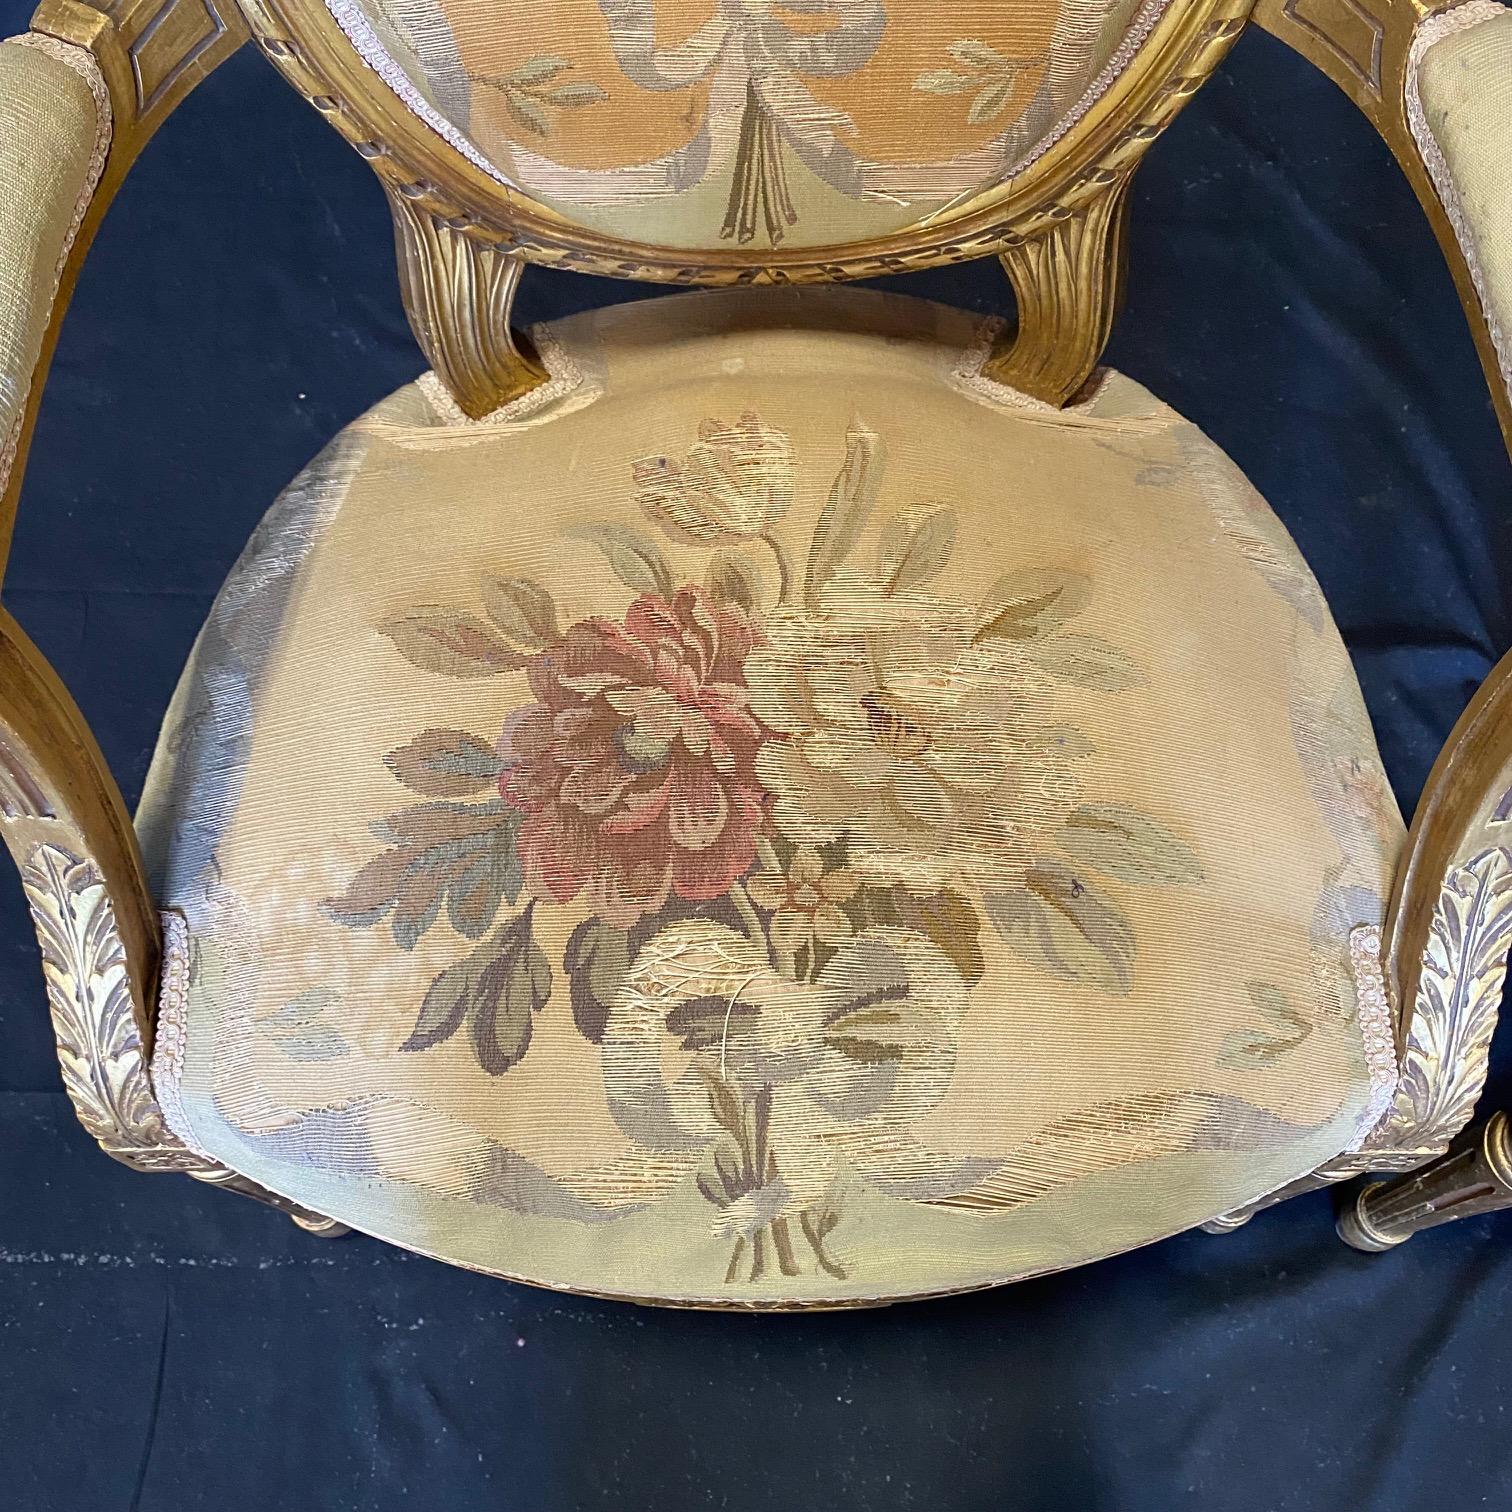 A magnificent pair of French Louis XVI walnut and richly upholstered armchairs in rare handwoven Aubusson tapestries. The quality of the Aubusson tapestries is wonderful but as expected, some minor threadbare areas on the edges of the seats. Arm